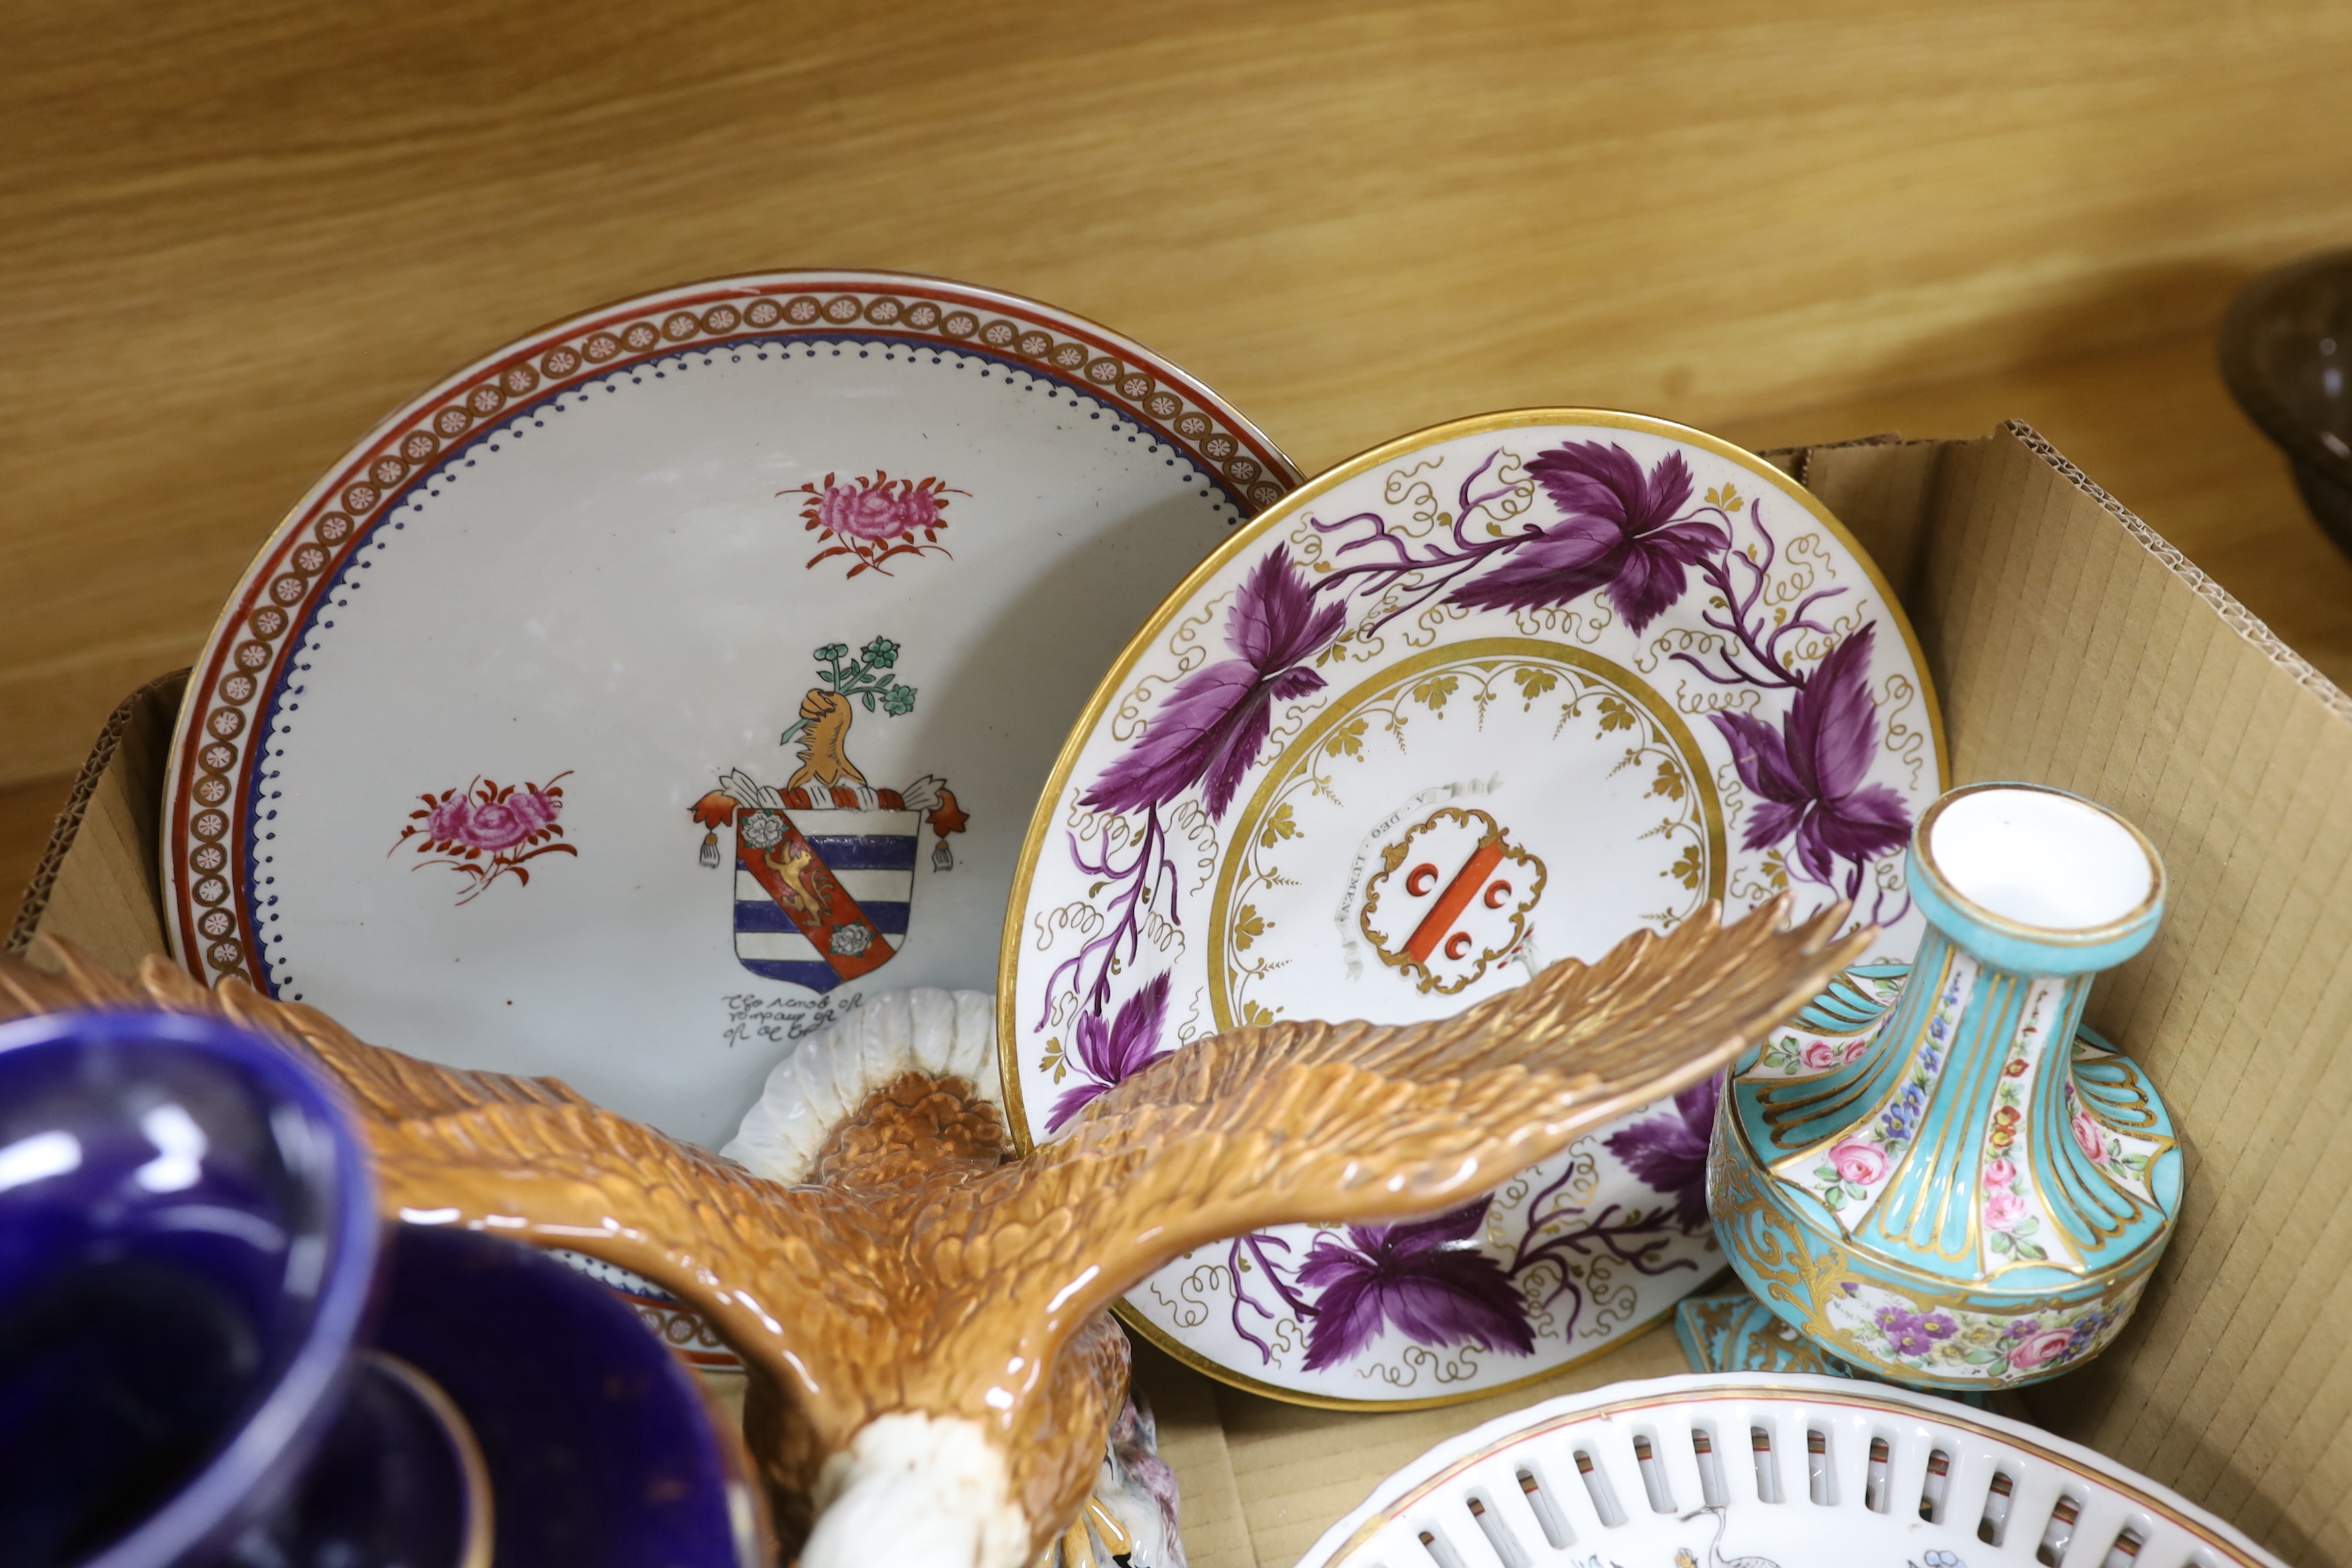 Two Doulton vases, a Beswick eagle, armorial plates, a vase and an advertising top hat - Image 2 of 4